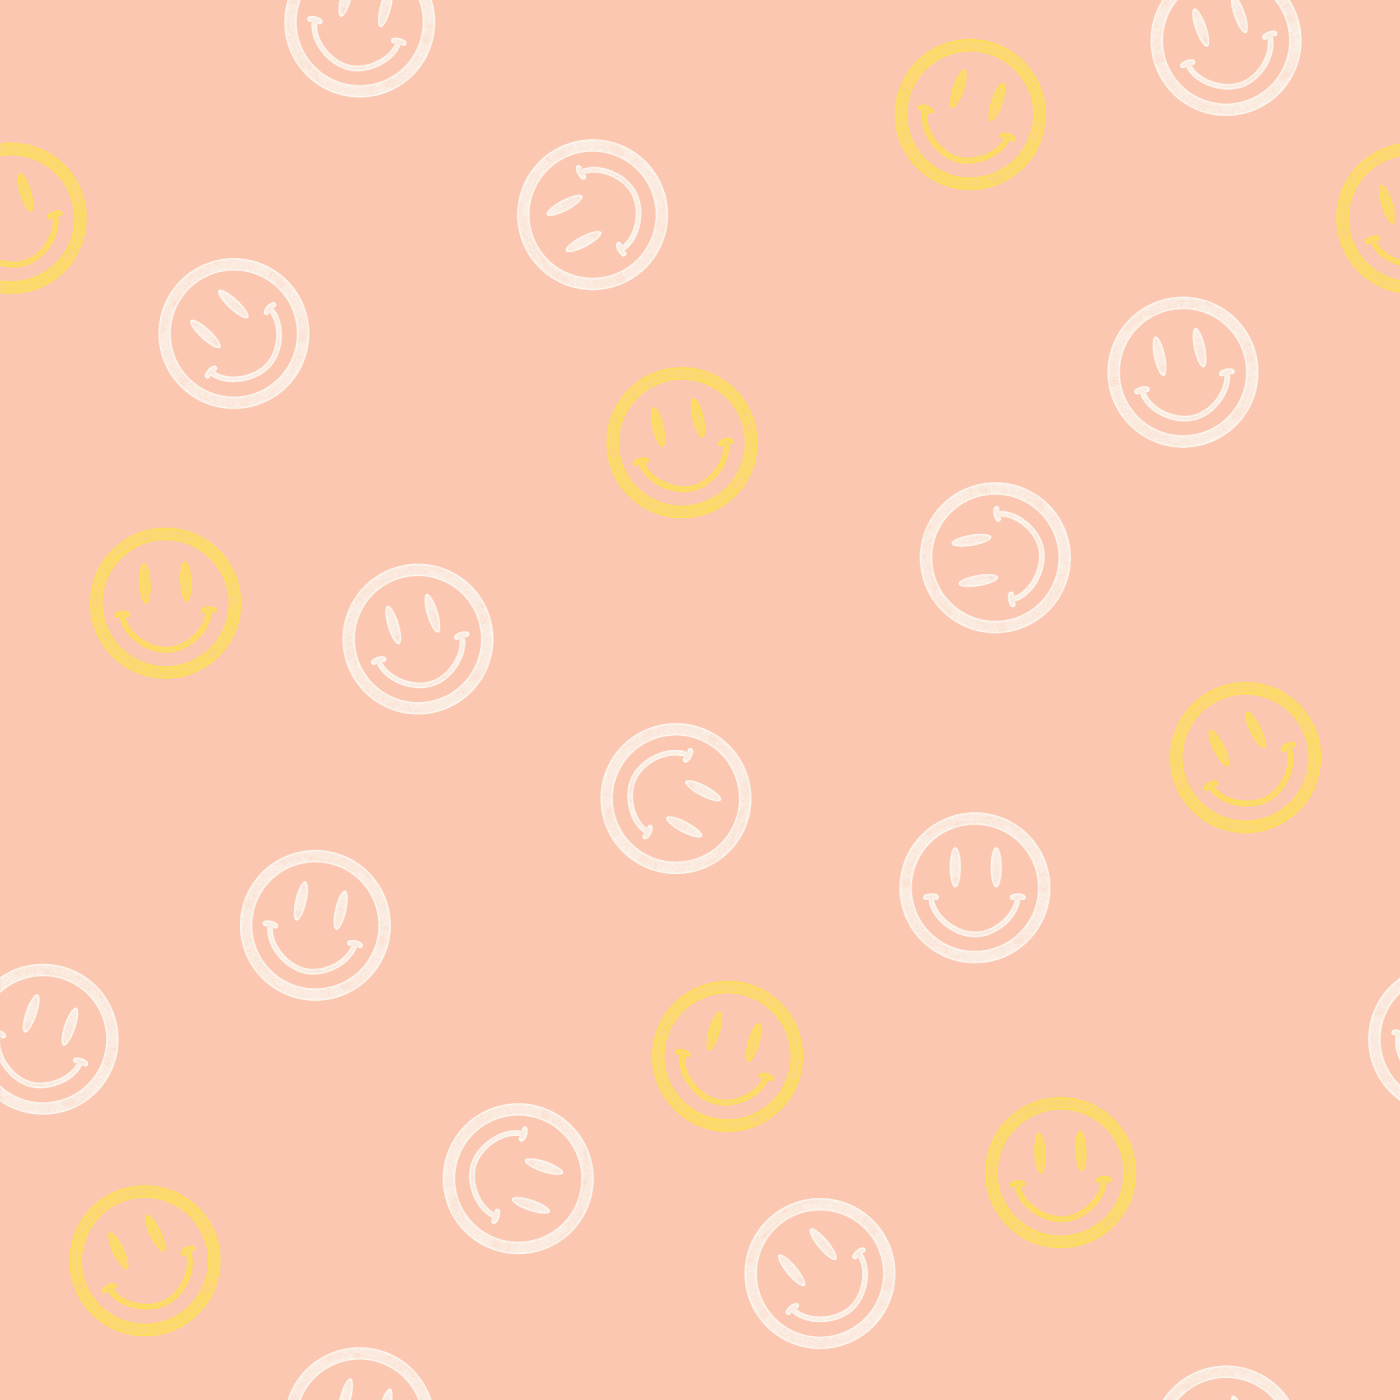 smiley backgrounds